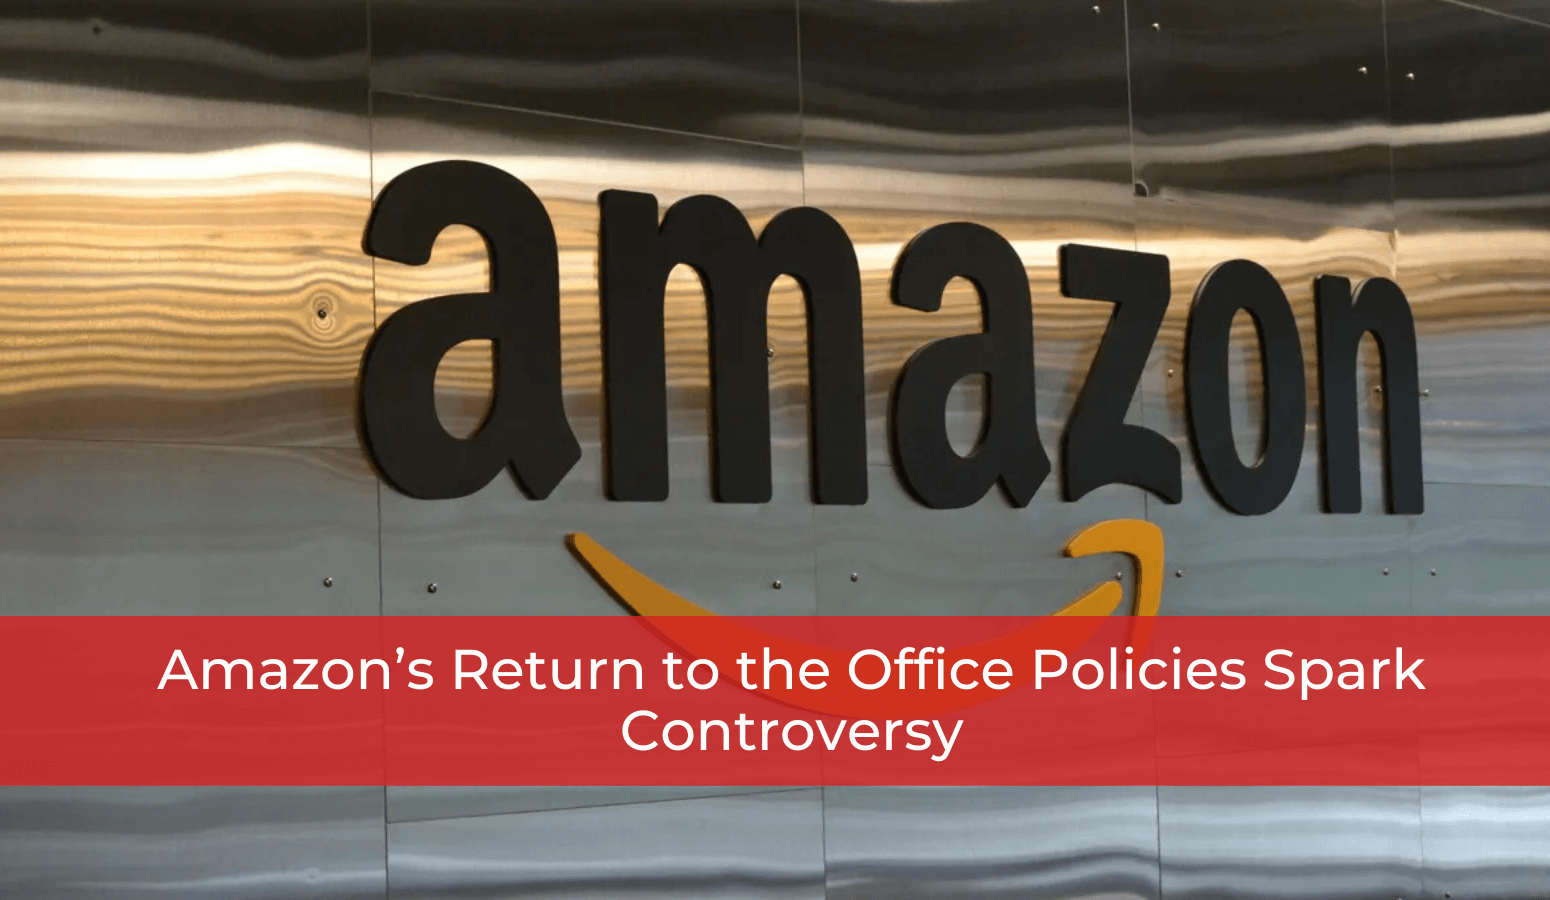 Featured image for “Amazon’s Return to the Office Policies Spark Controversy”